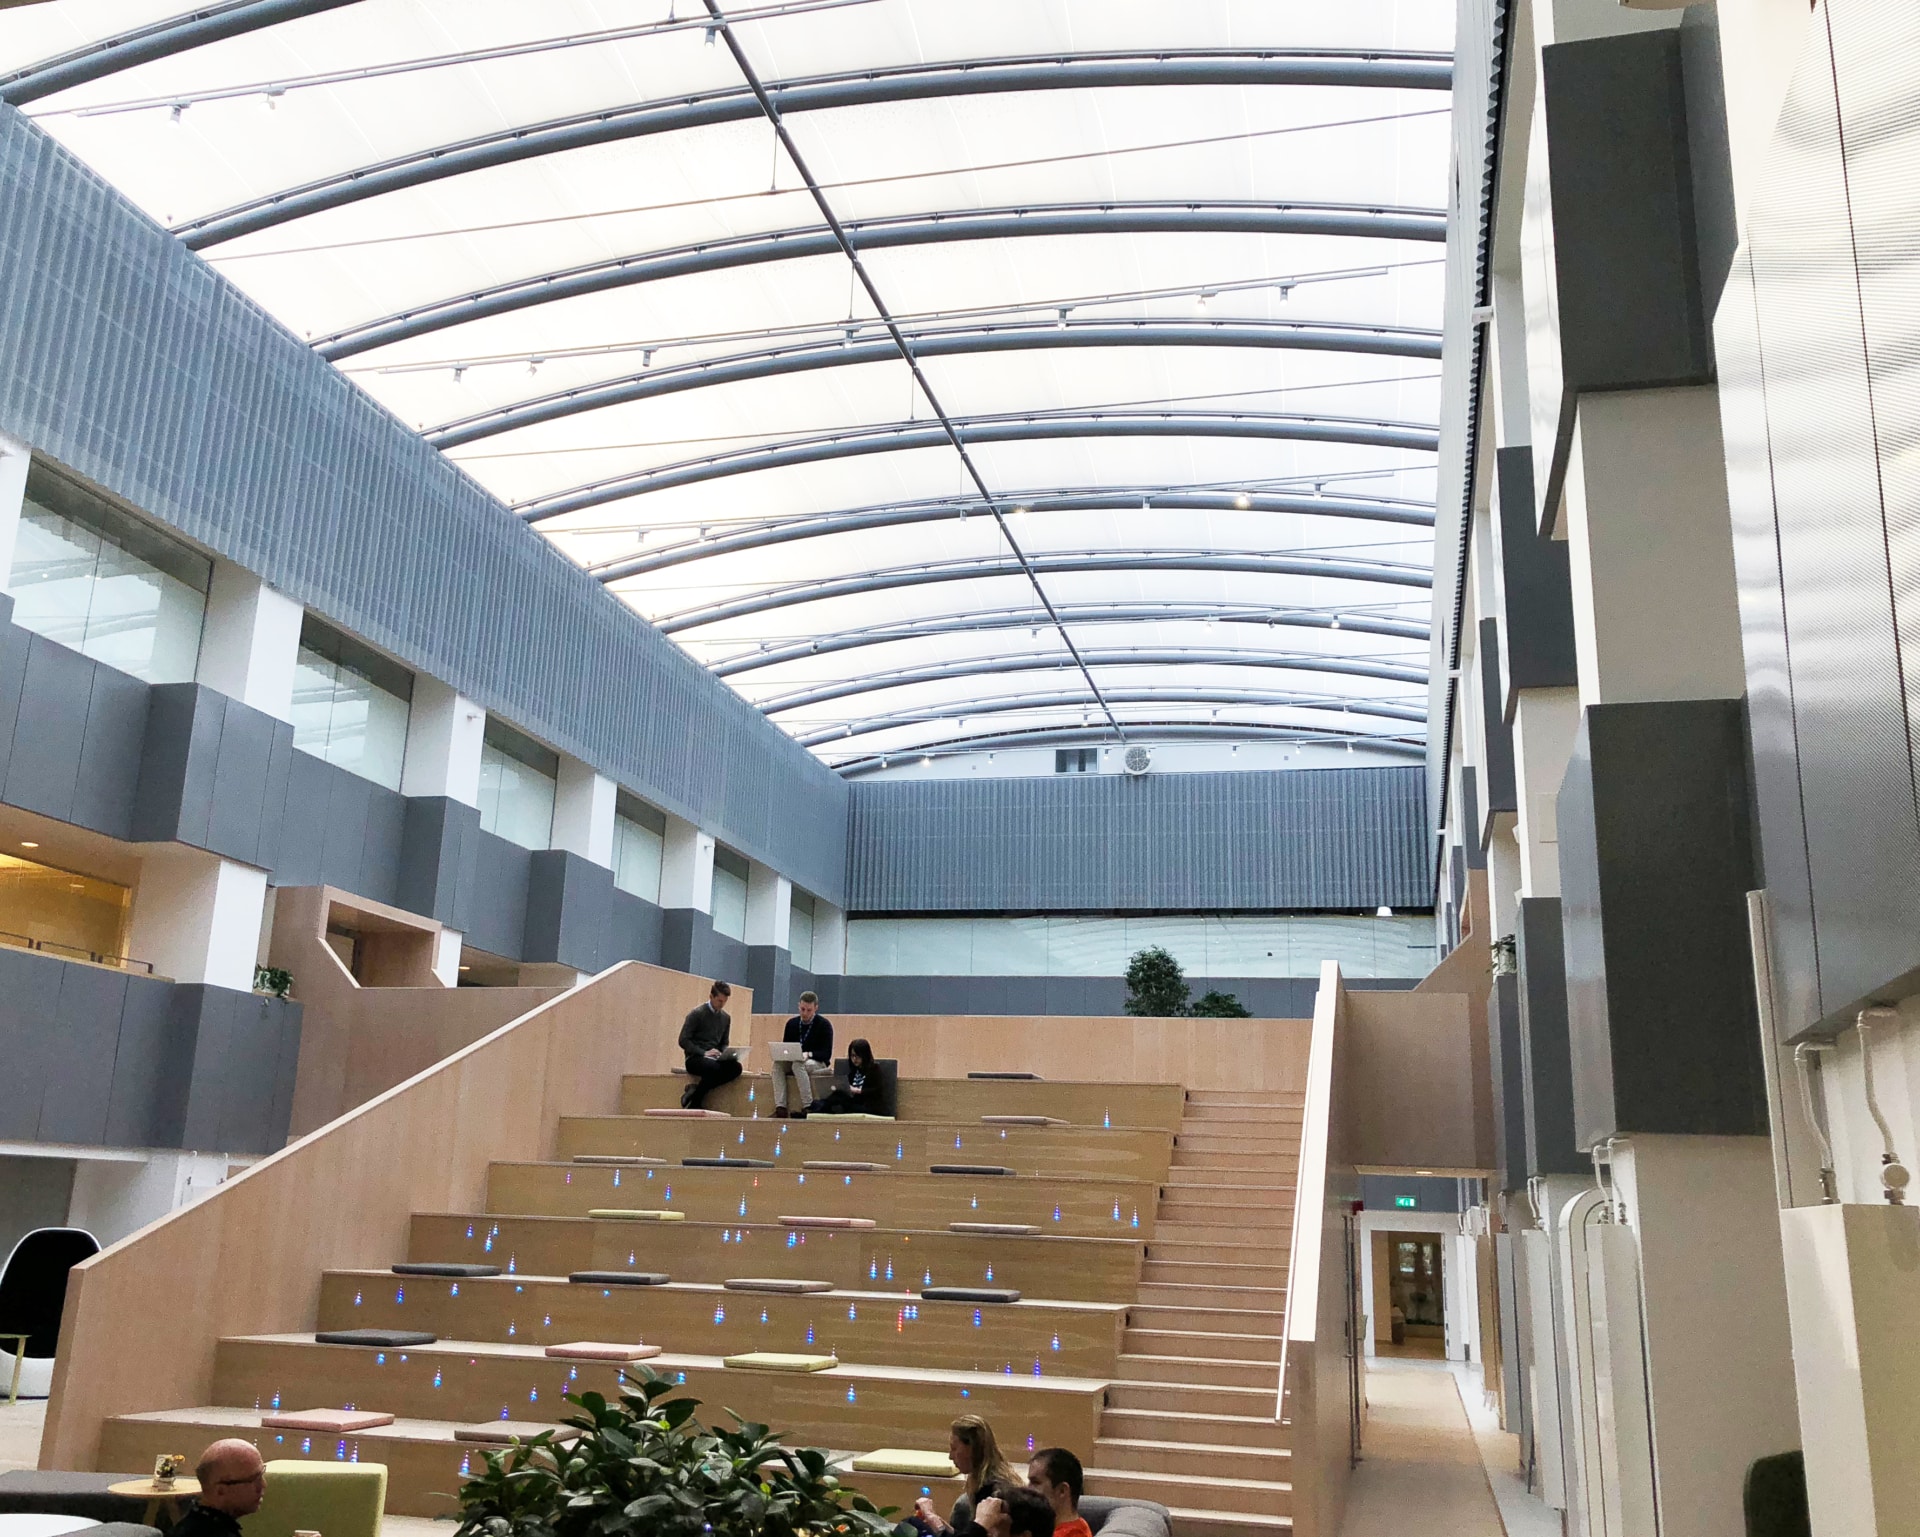 Our system created a light atrium with acoustic comfort, where people like to spend their time.